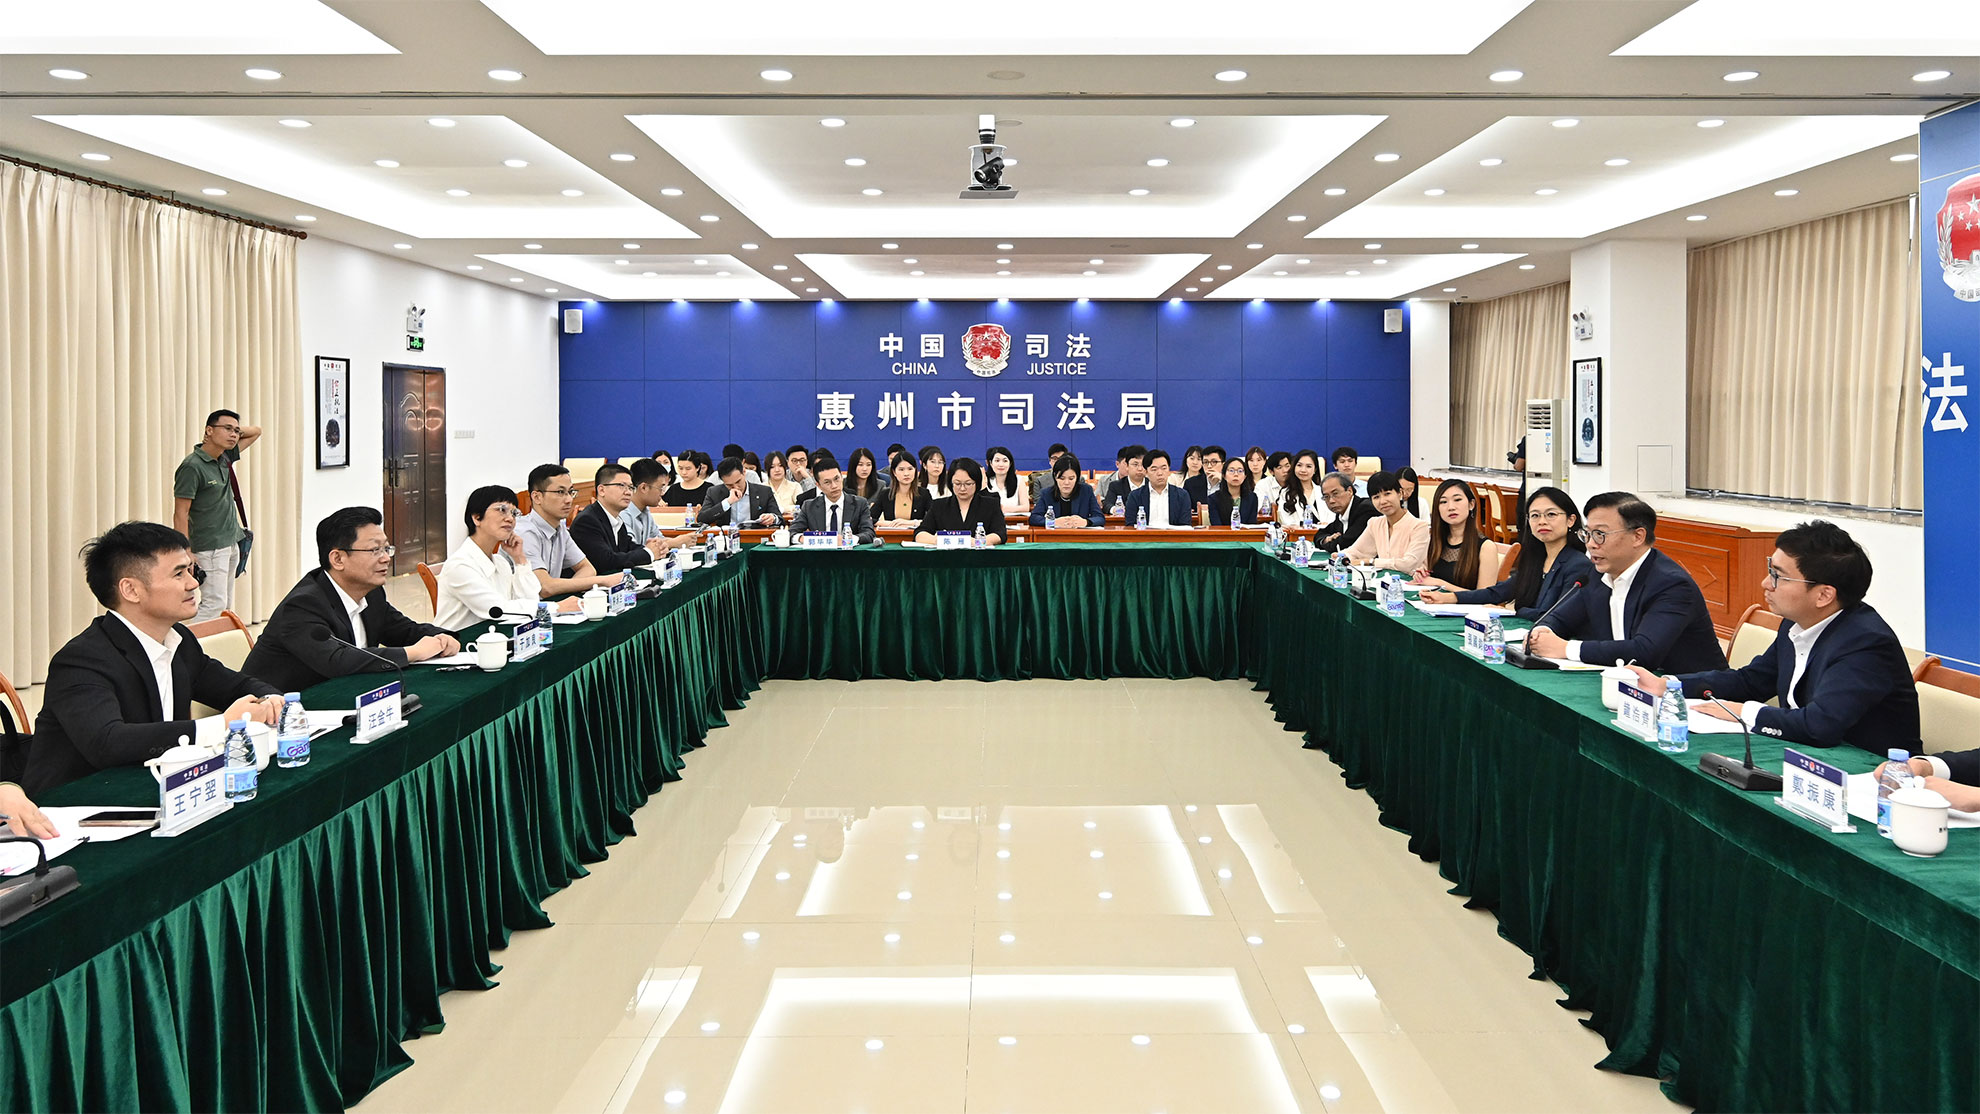 The Deputy Secretary for Justice, Mr Cheung Kwok-kwan, led a delegation comprising young lawyers and law students to call on the Huizhou Municipal People's Government today (September 7). Photo shows Mr Cheung (second right) meeting with Vice Mayor of Huizhou Municipal People's Government Mr Yu Jialiang (second left) to exchange views.